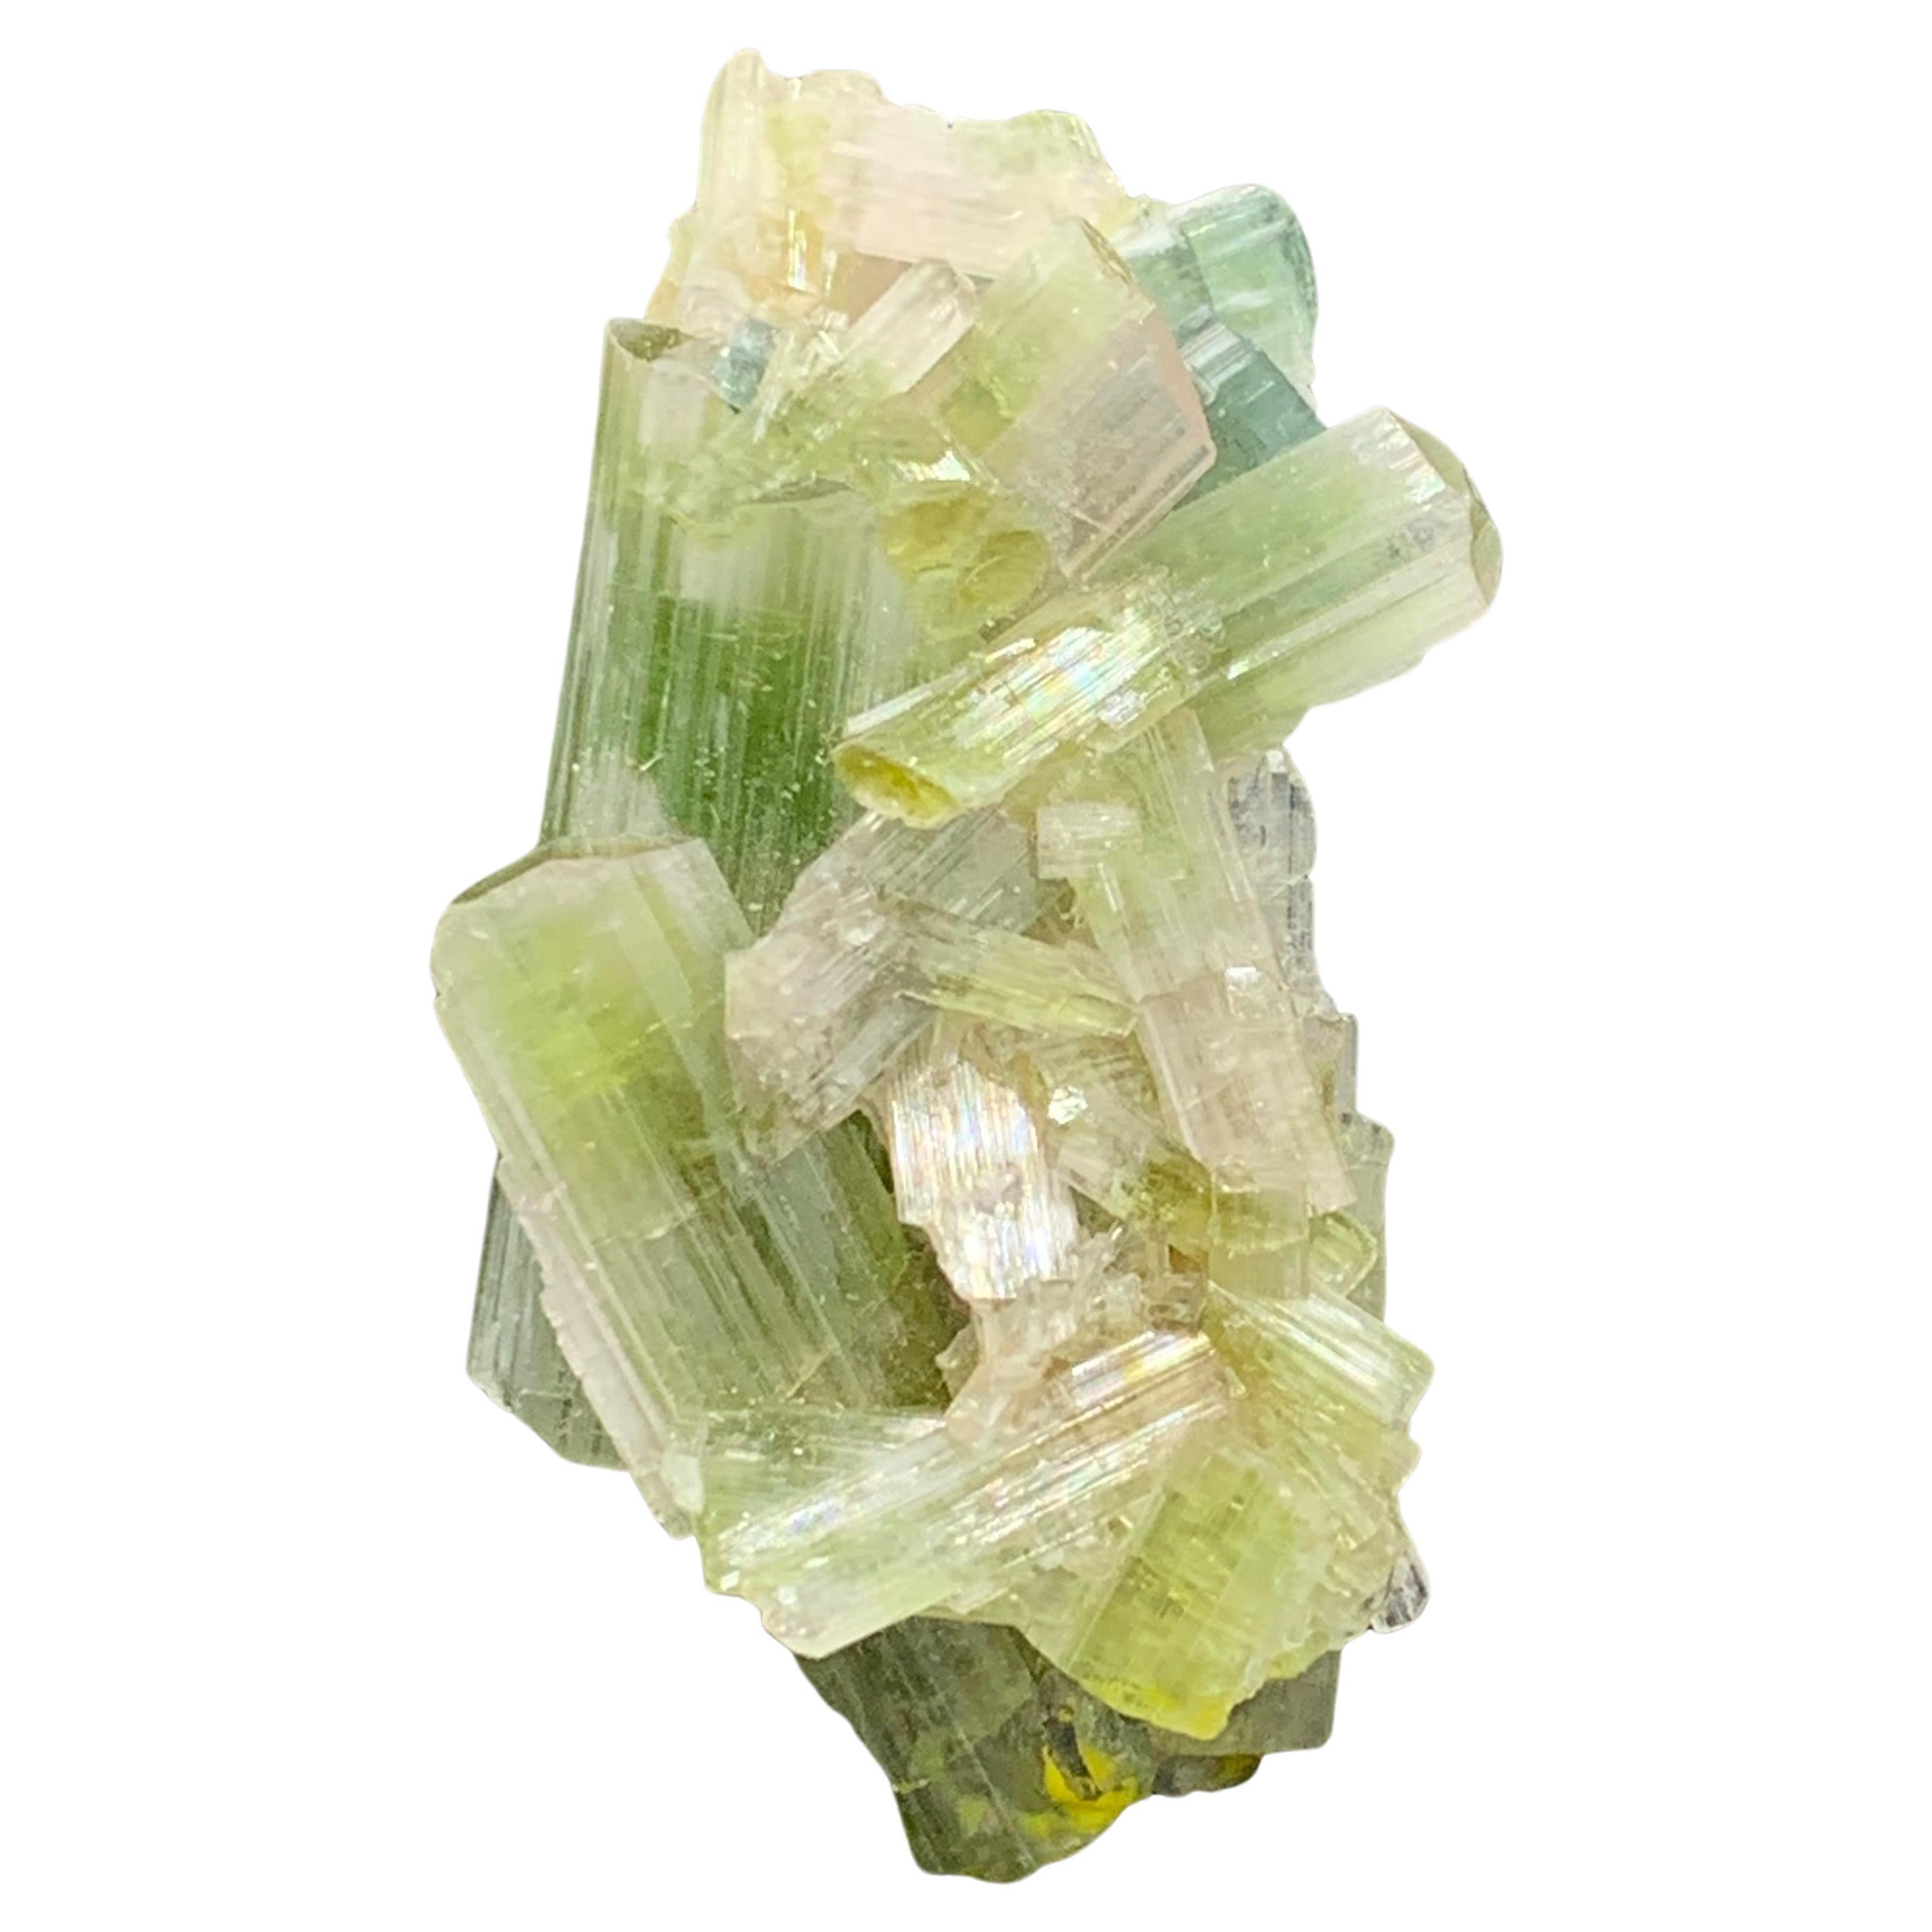 60.05 Carat Glamorous Tourmaline Crystals Cluster From Afghanistan 